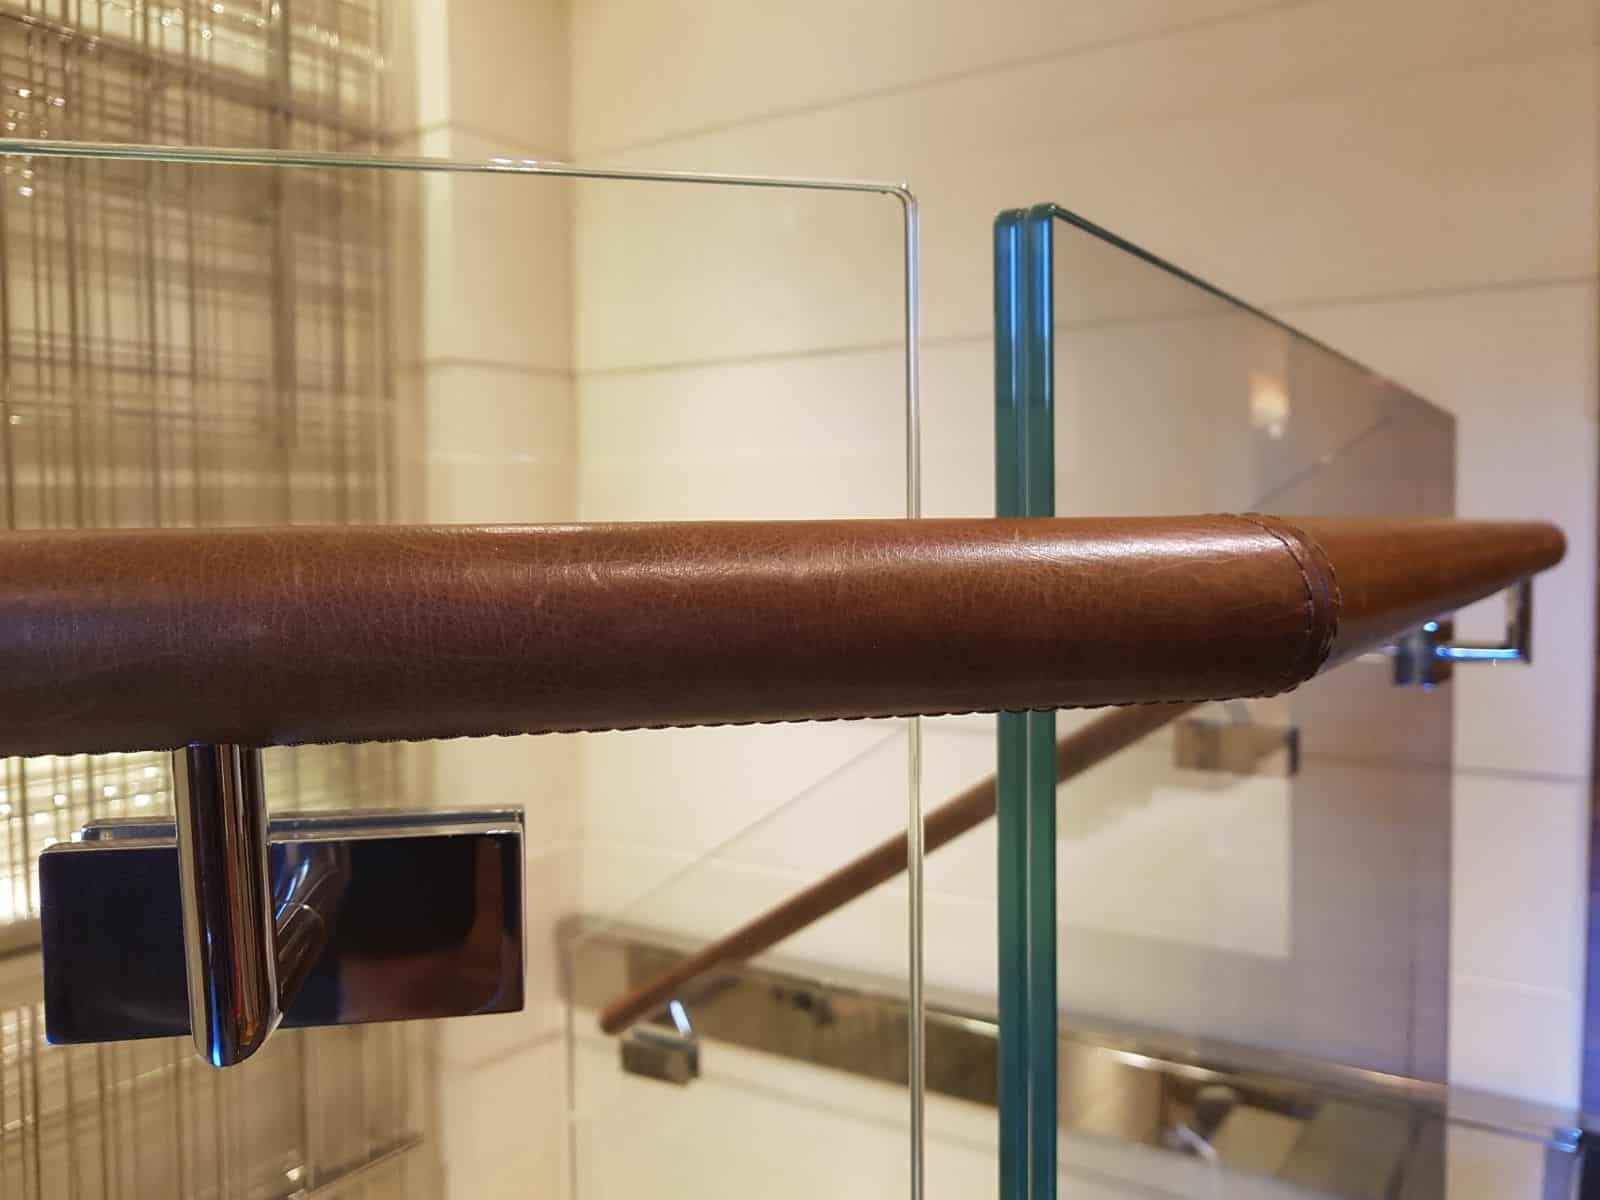 leather wrapped handrails next to frameless glass balustrade